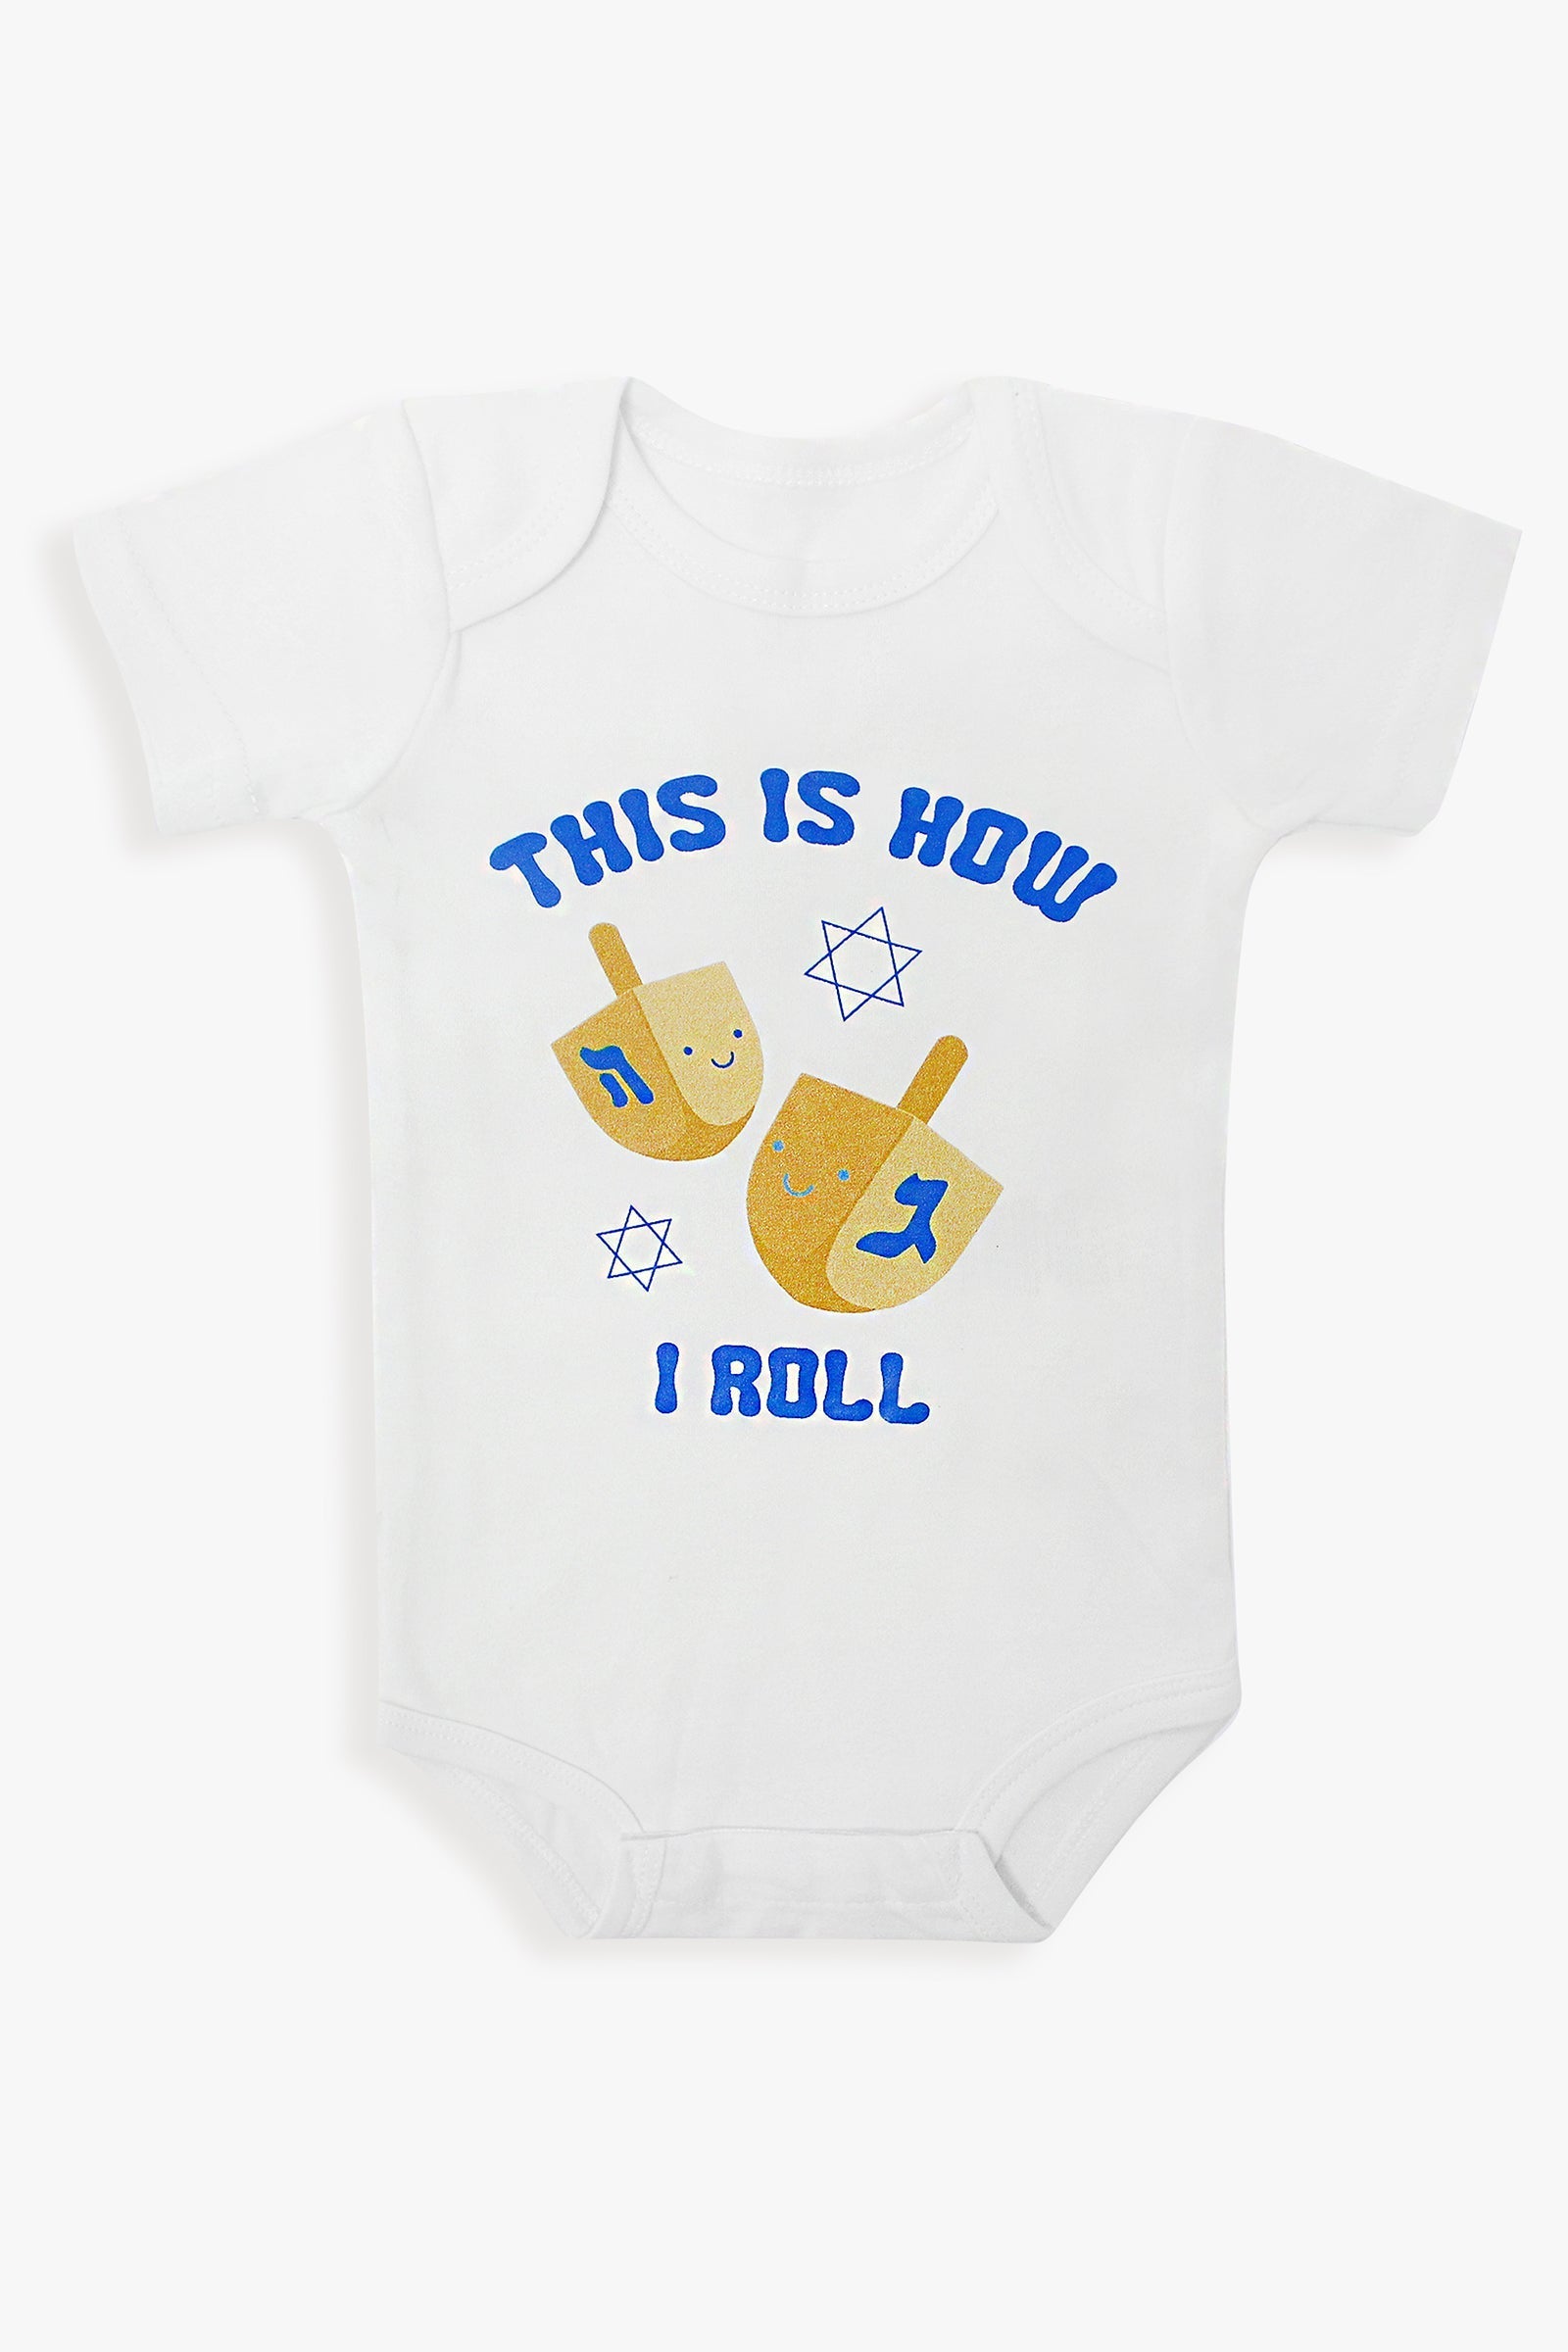 This is How I Roll Hanukkah Holiday Baby Onesie